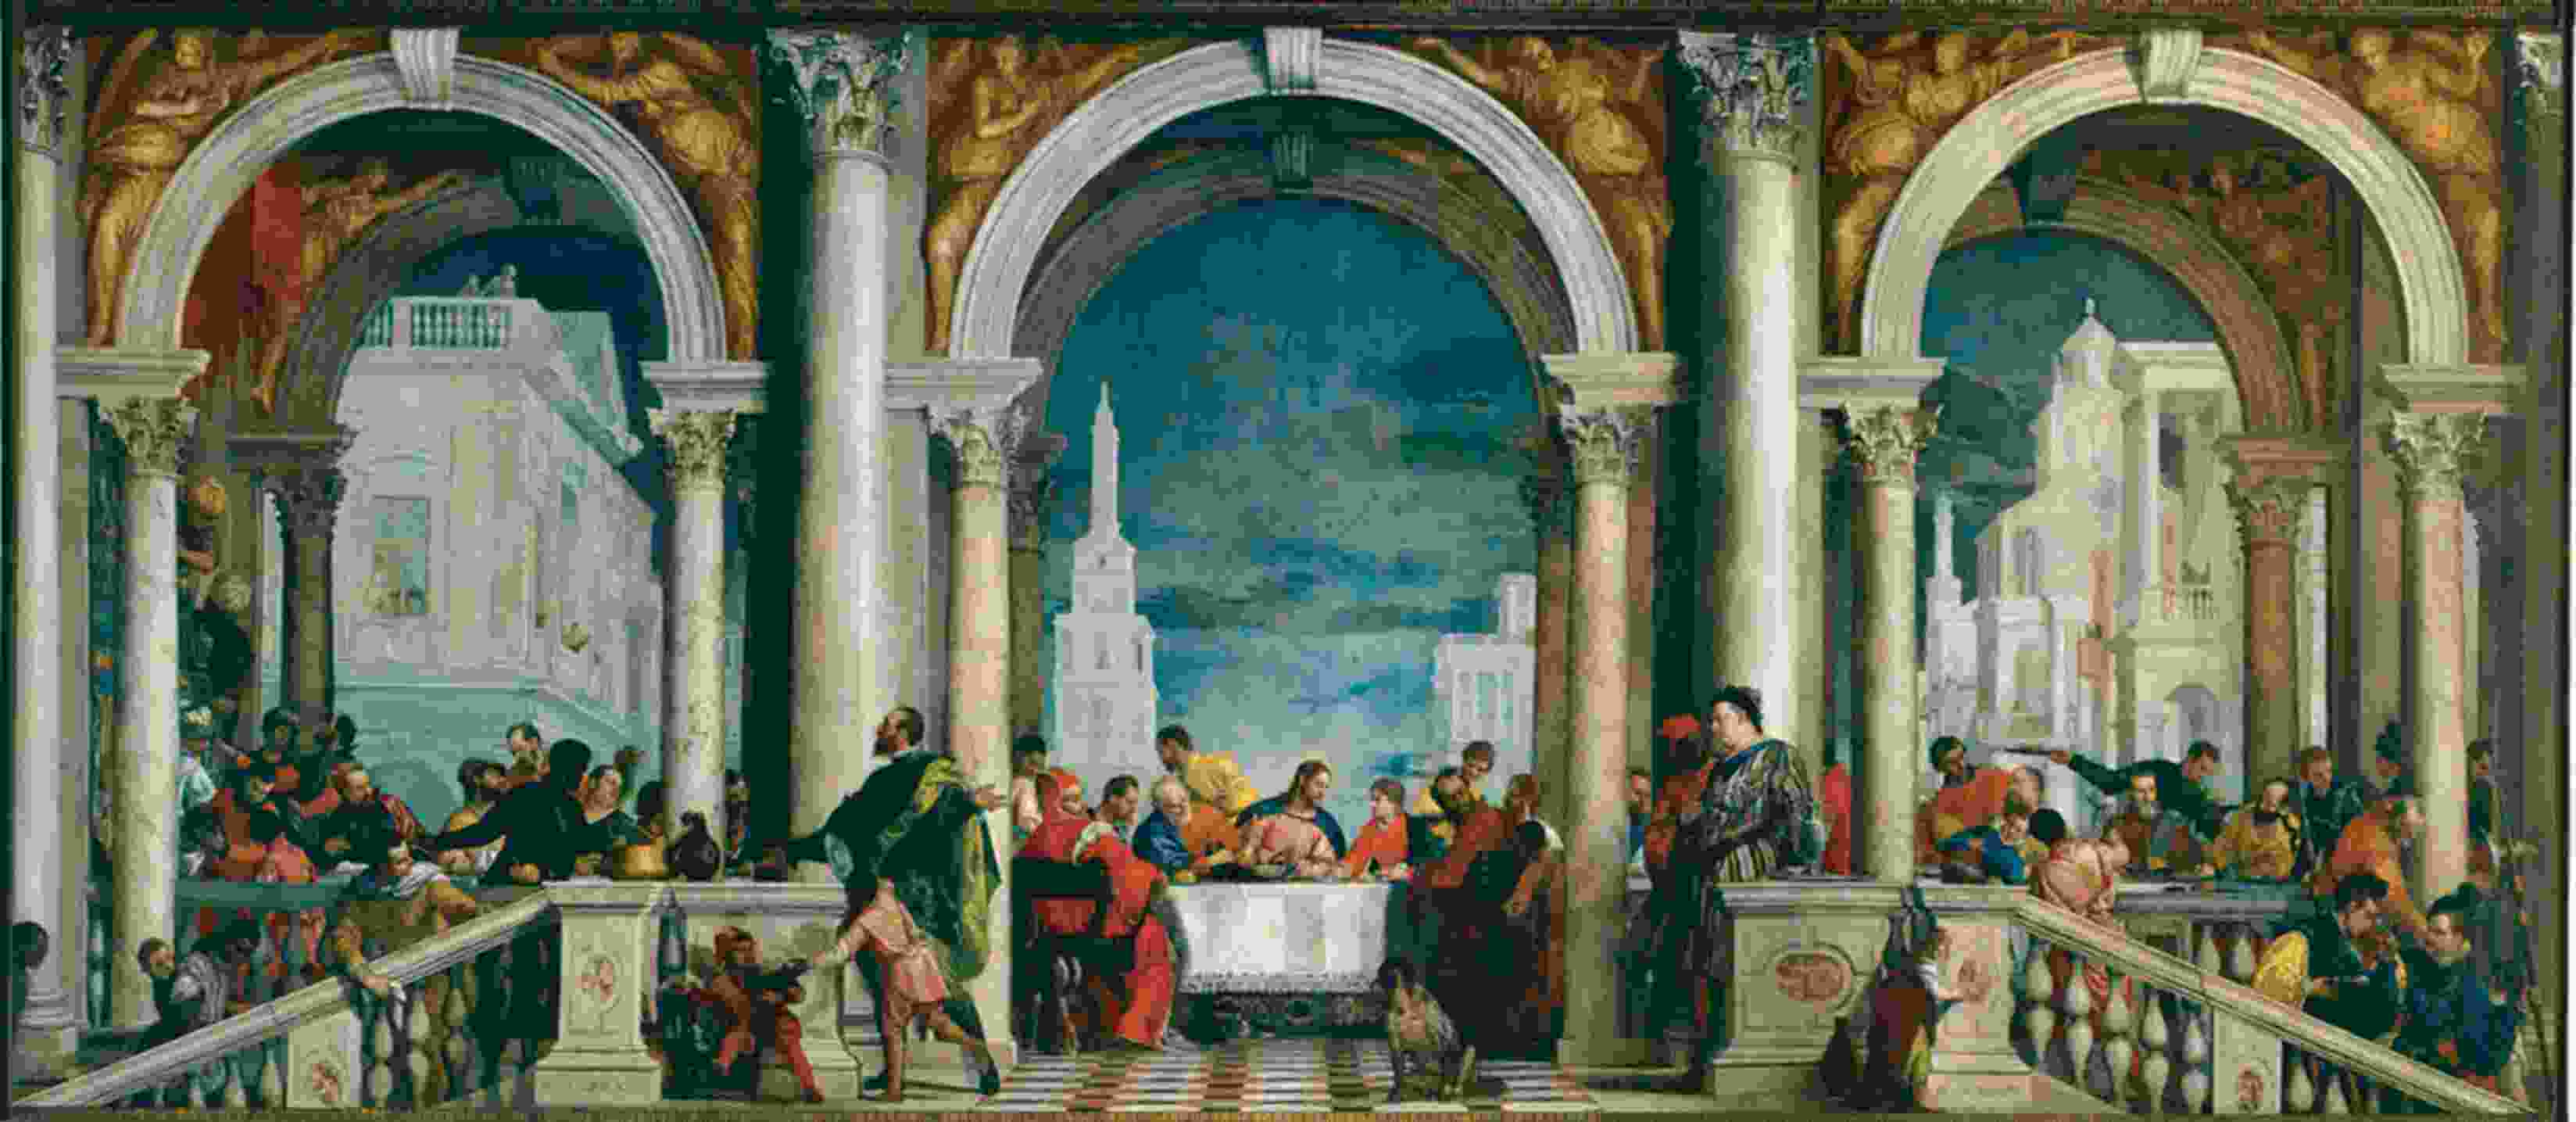 Paolo Veronese’s Feast in the House of Levi of 1573